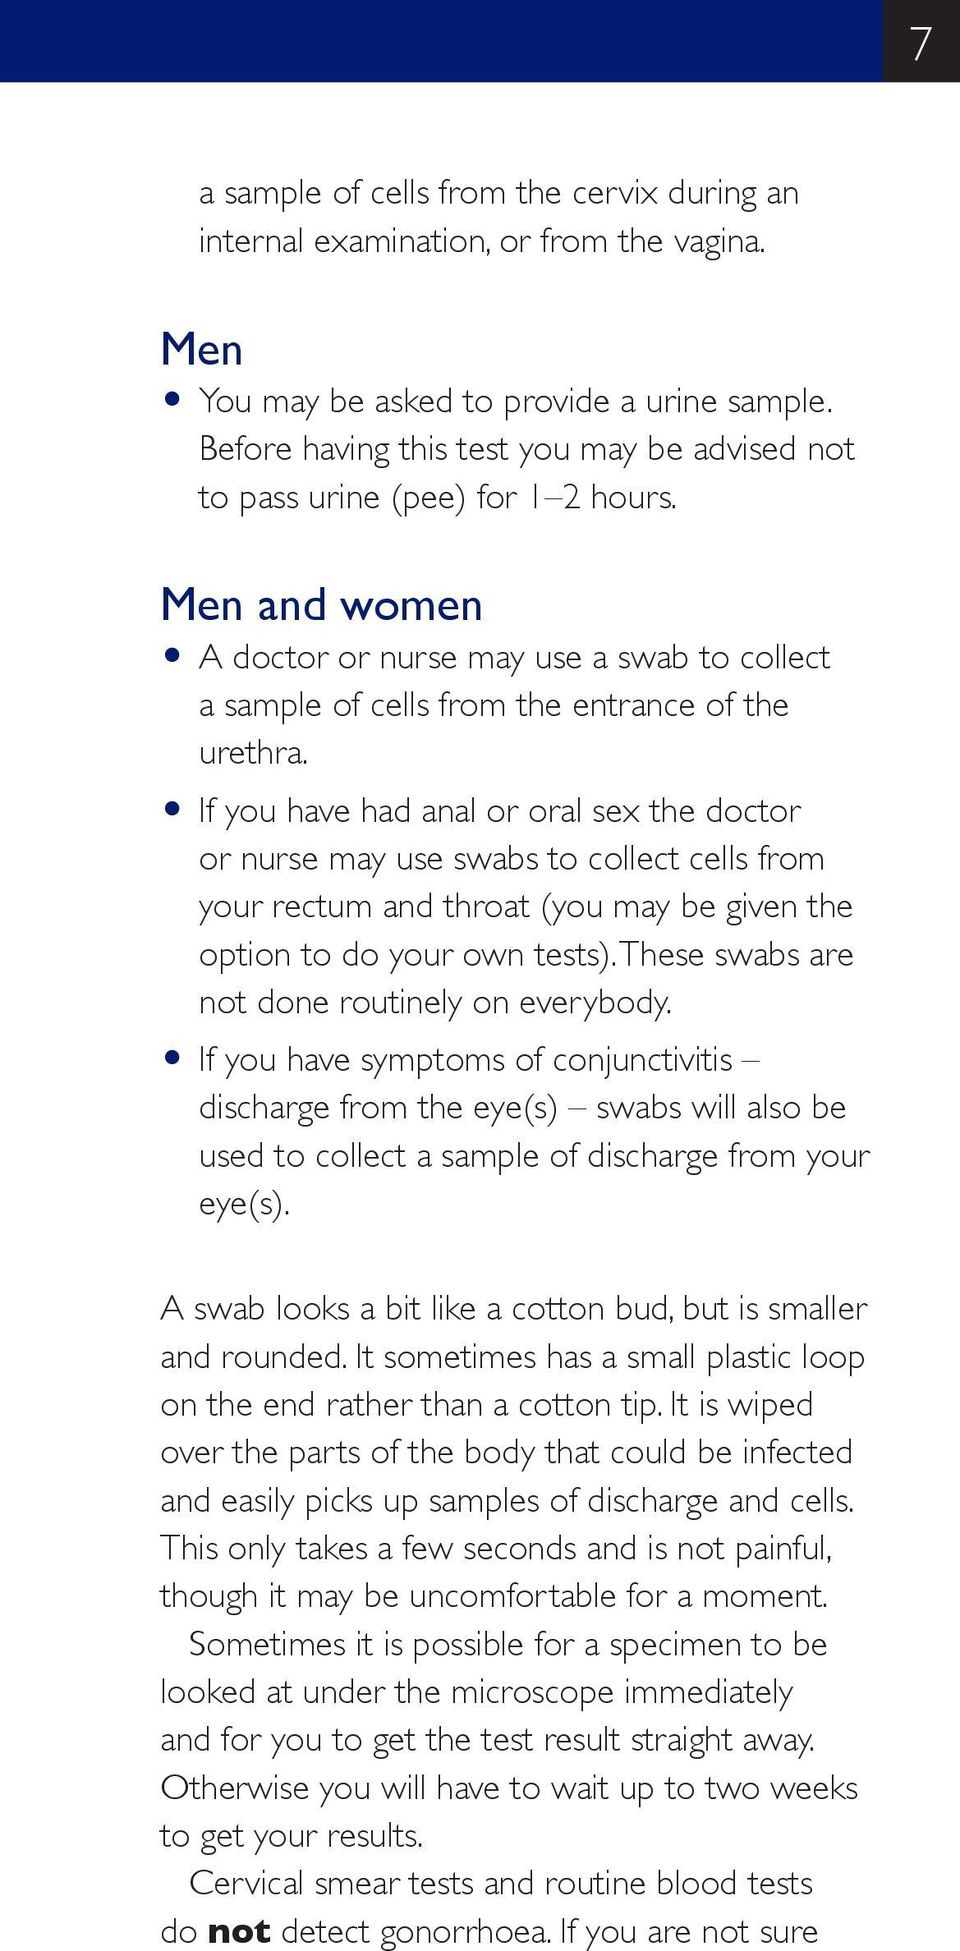 O If you have had anal or oral sex the doctor or nurse may use swabs to collect cells from your rectum and throat (you may be given the option to do your own tests).